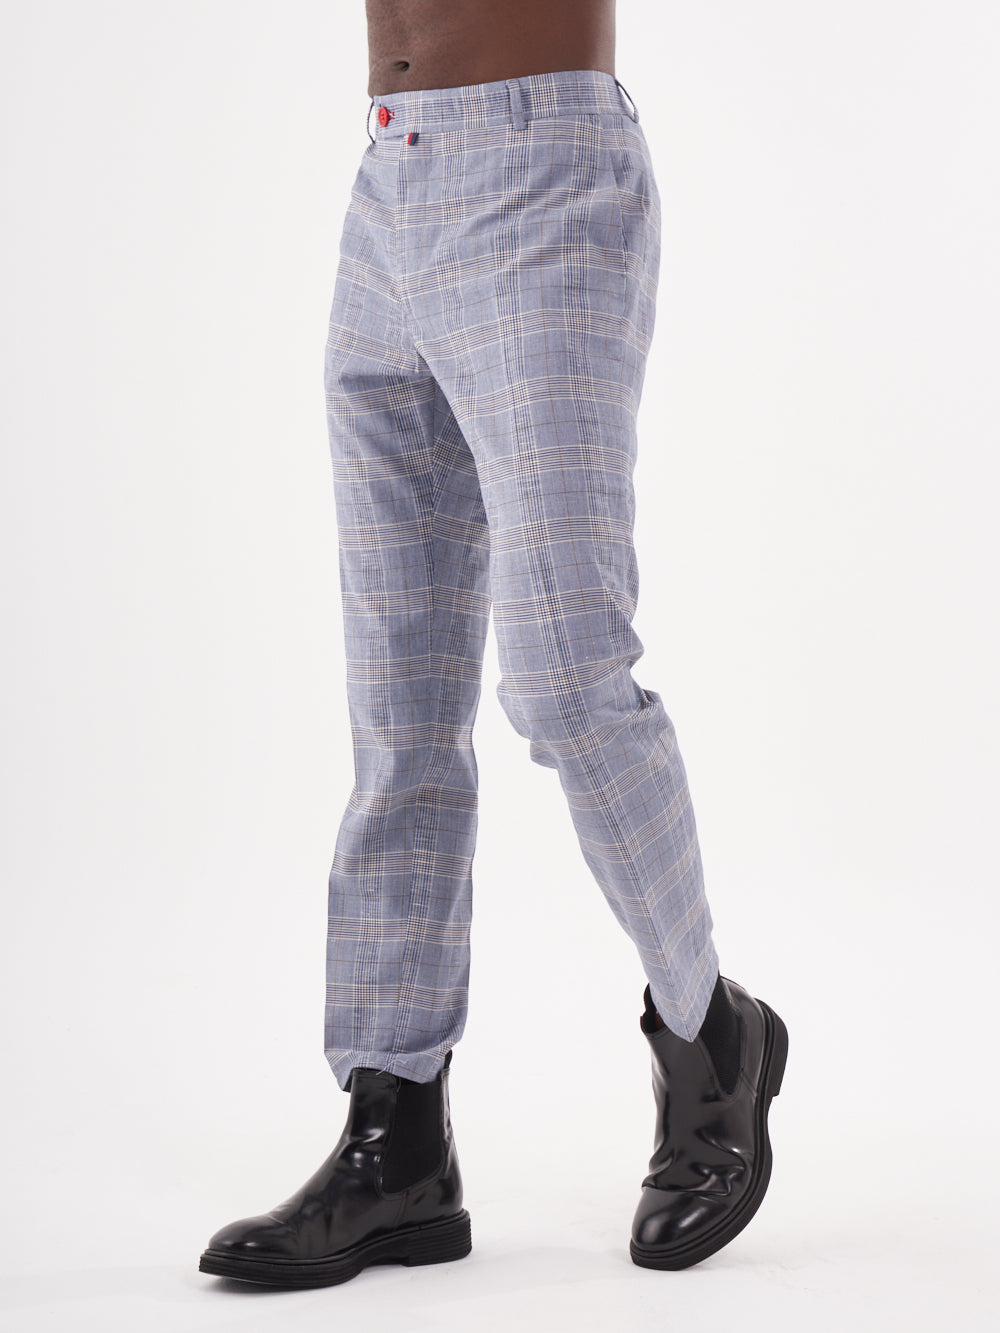 A man wearing Moraine Pants, a blue and white checkered pant.